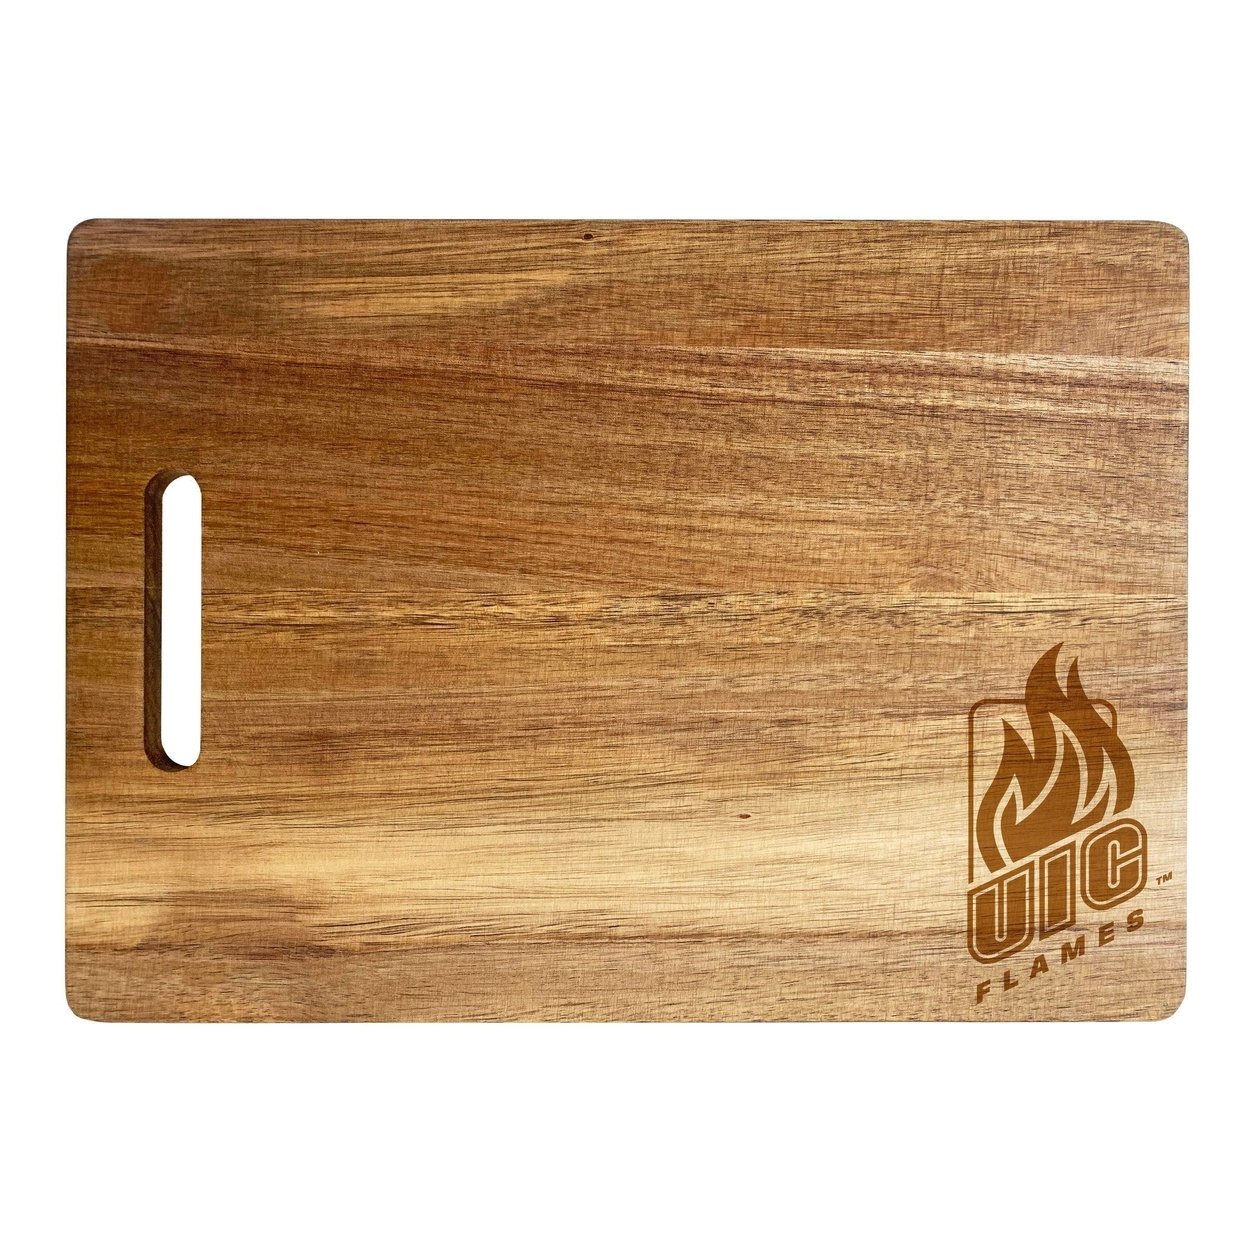 University Of Illinois At Chicago Engraved Wooden Cutting Board 10 X 14 Acacia Wood - Small Engraving